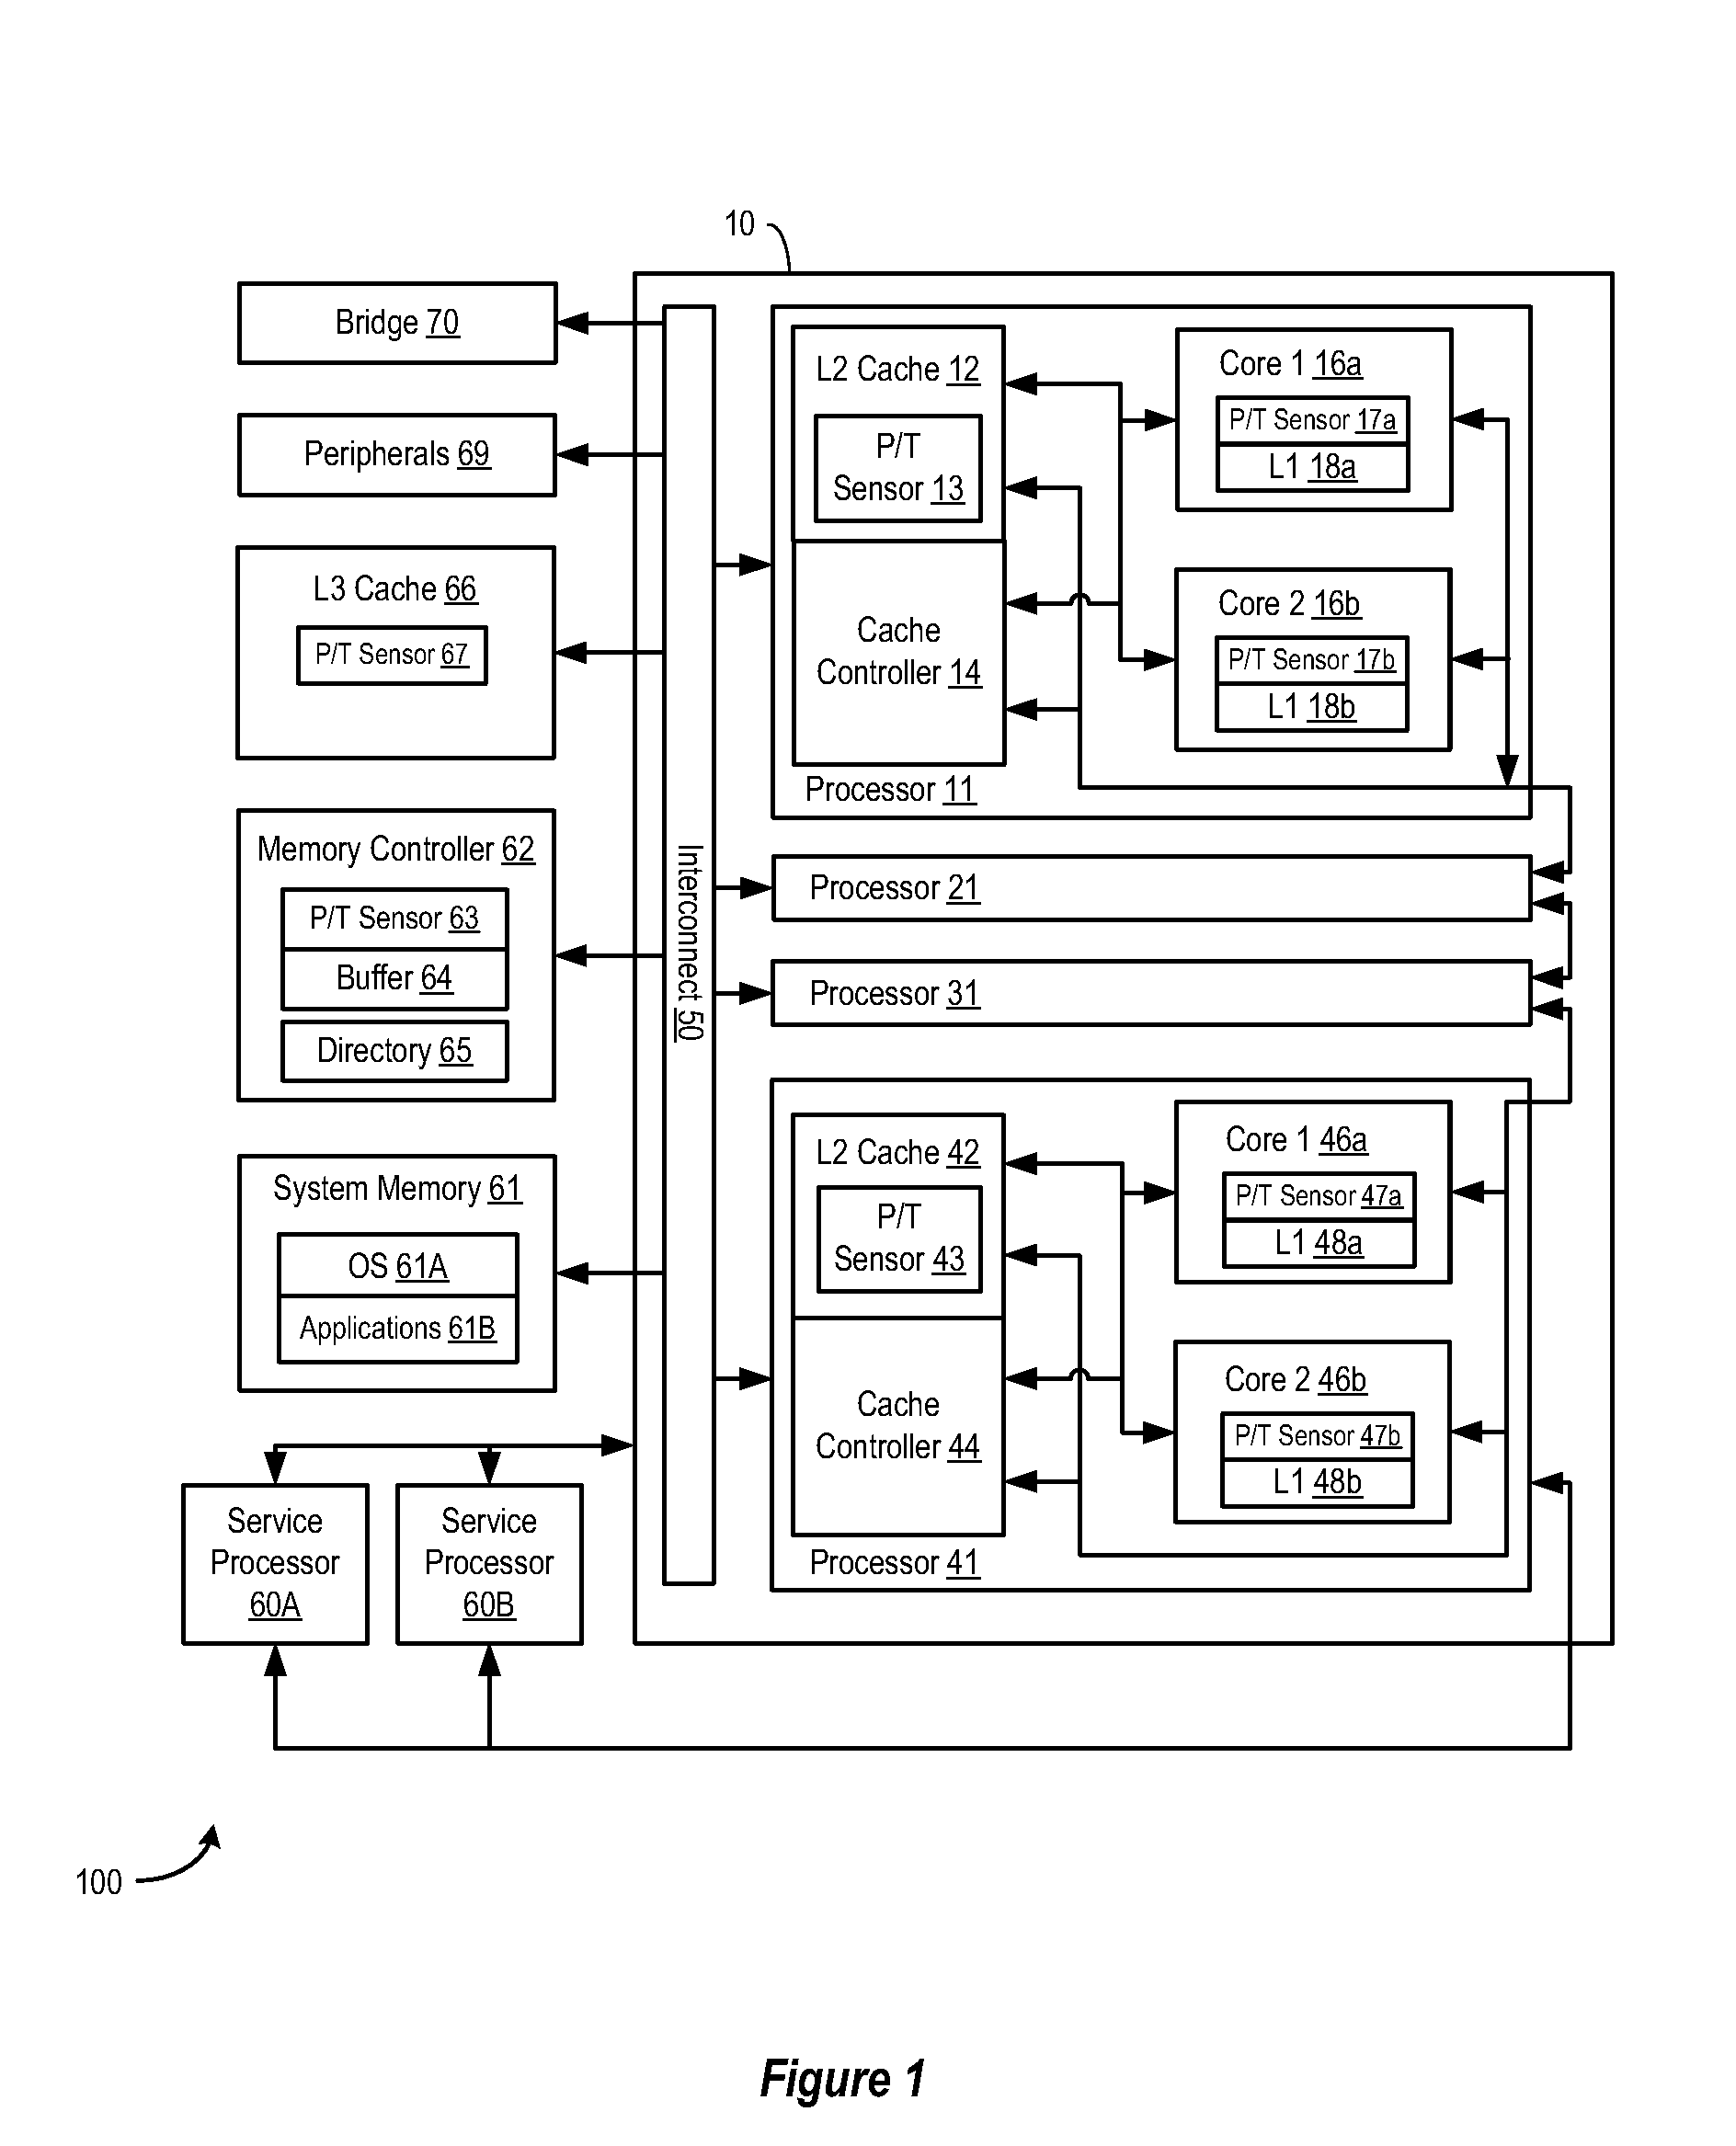 Power-aware line intervention for a multiprocessor directory-based coherency protocol